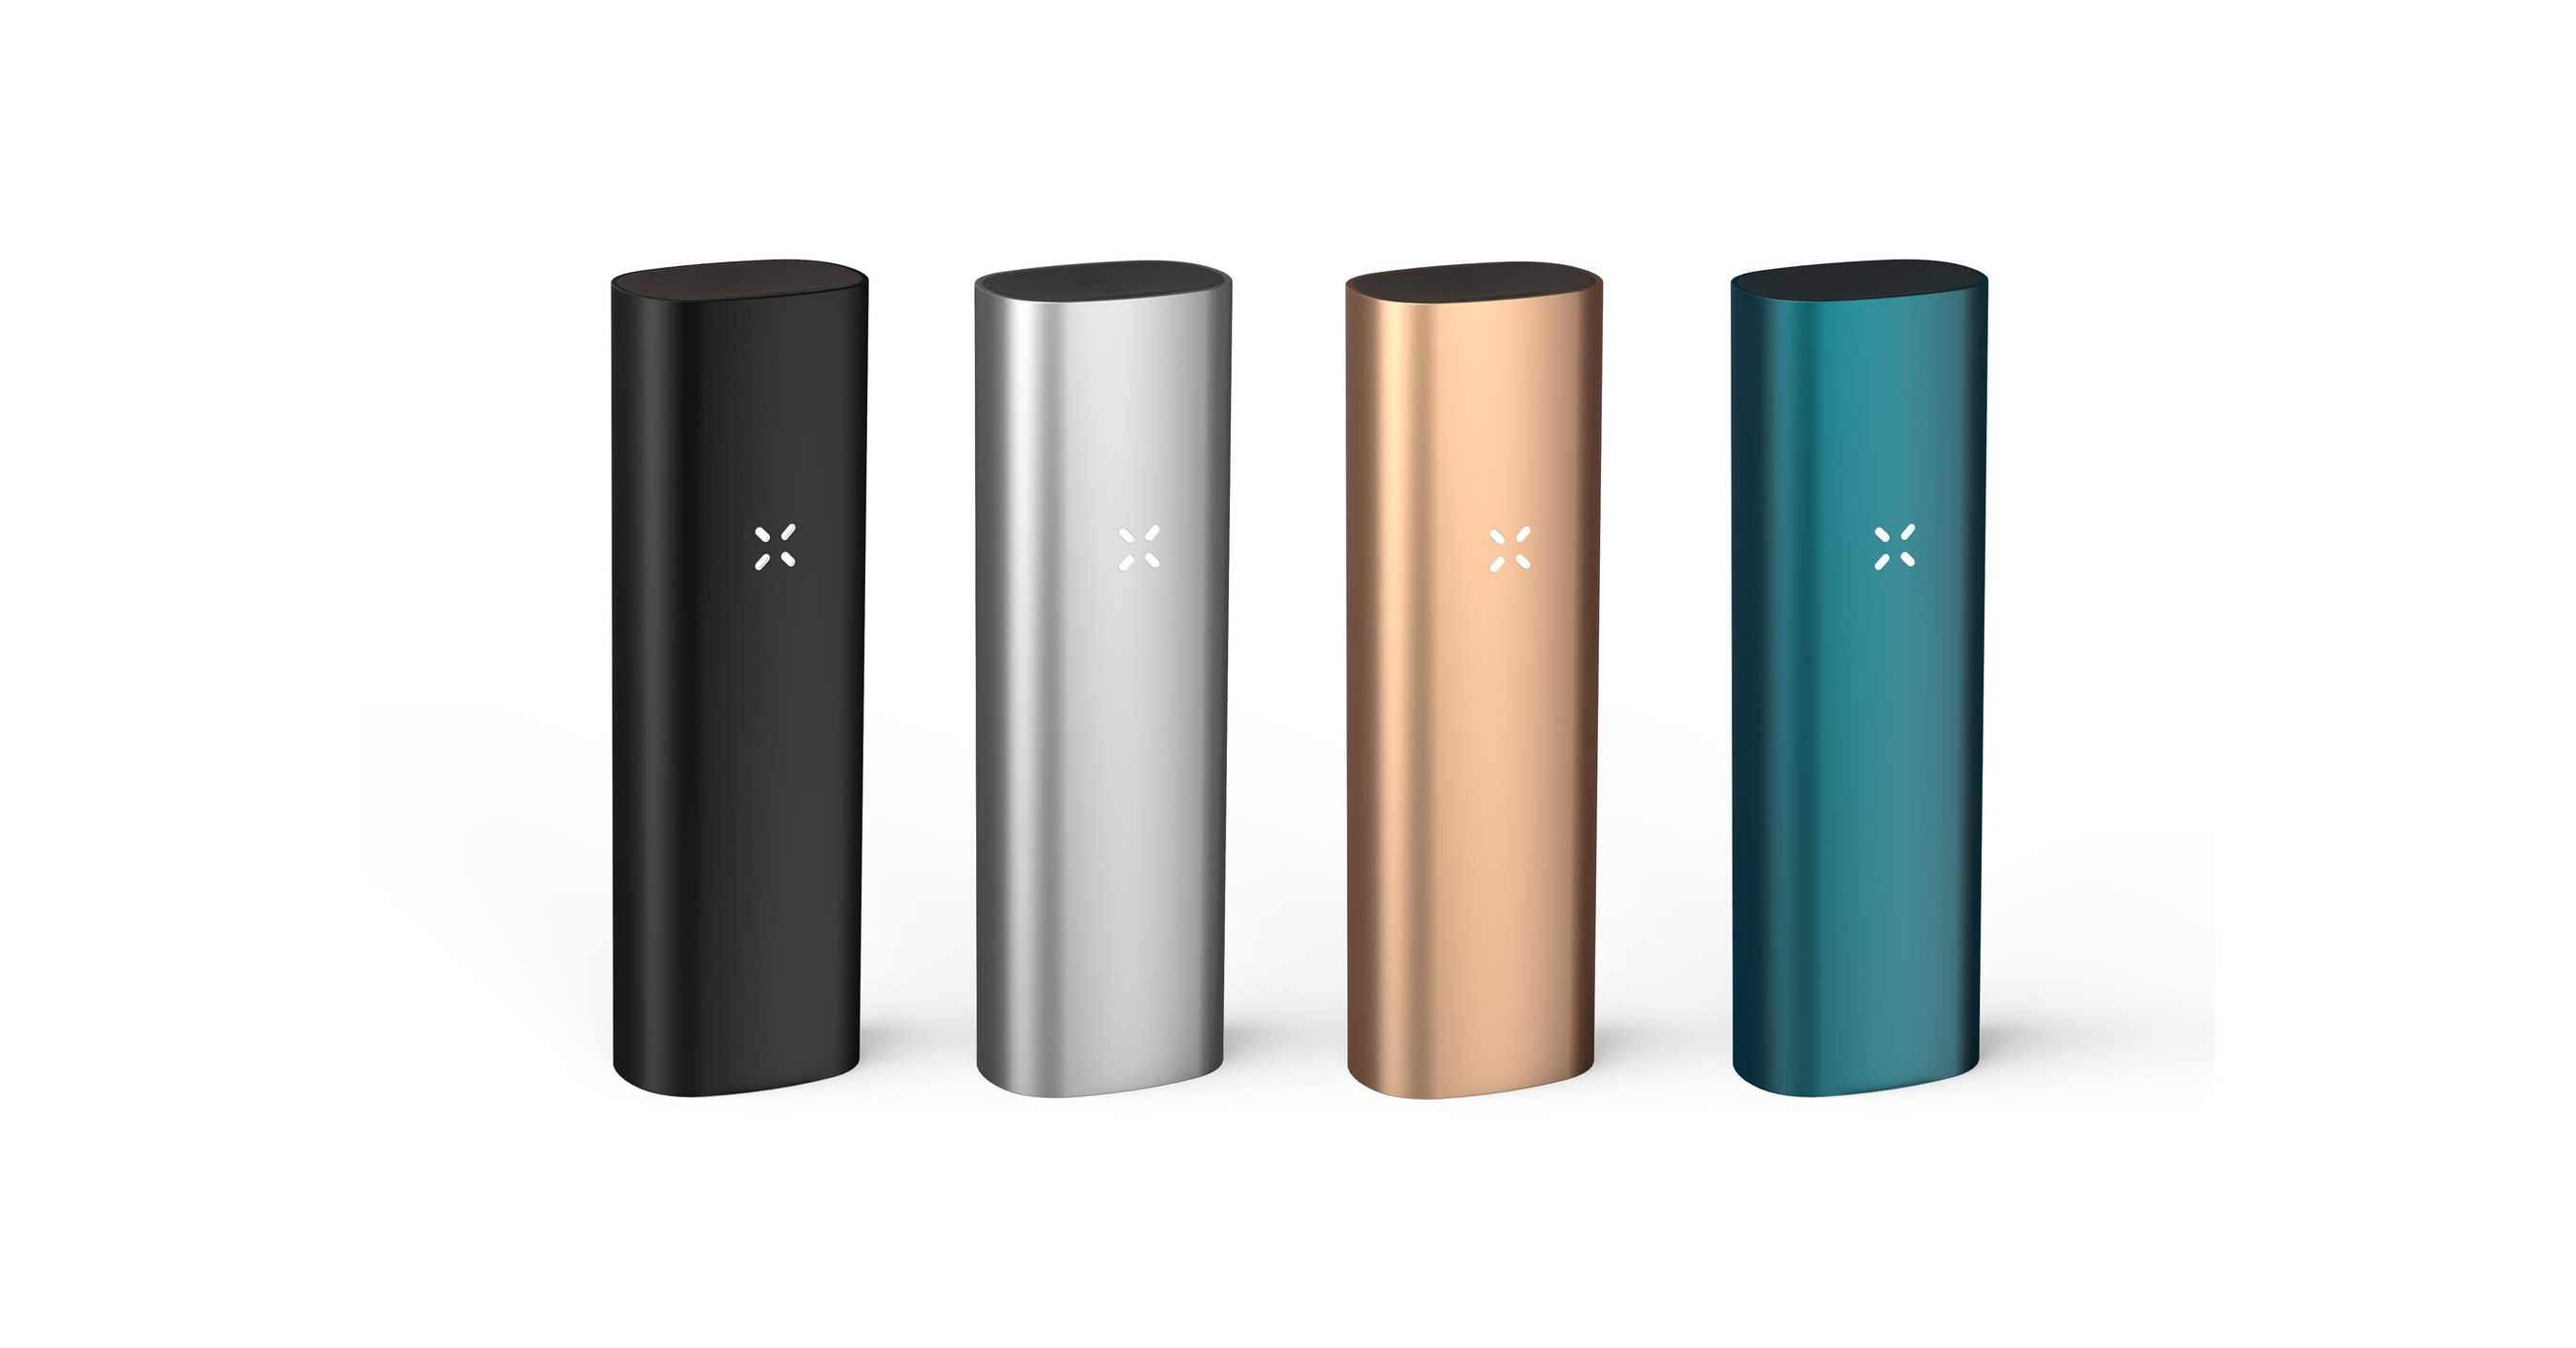 PAX Introduces New Finishes, Colors and Prices for Iconic Vaporizer